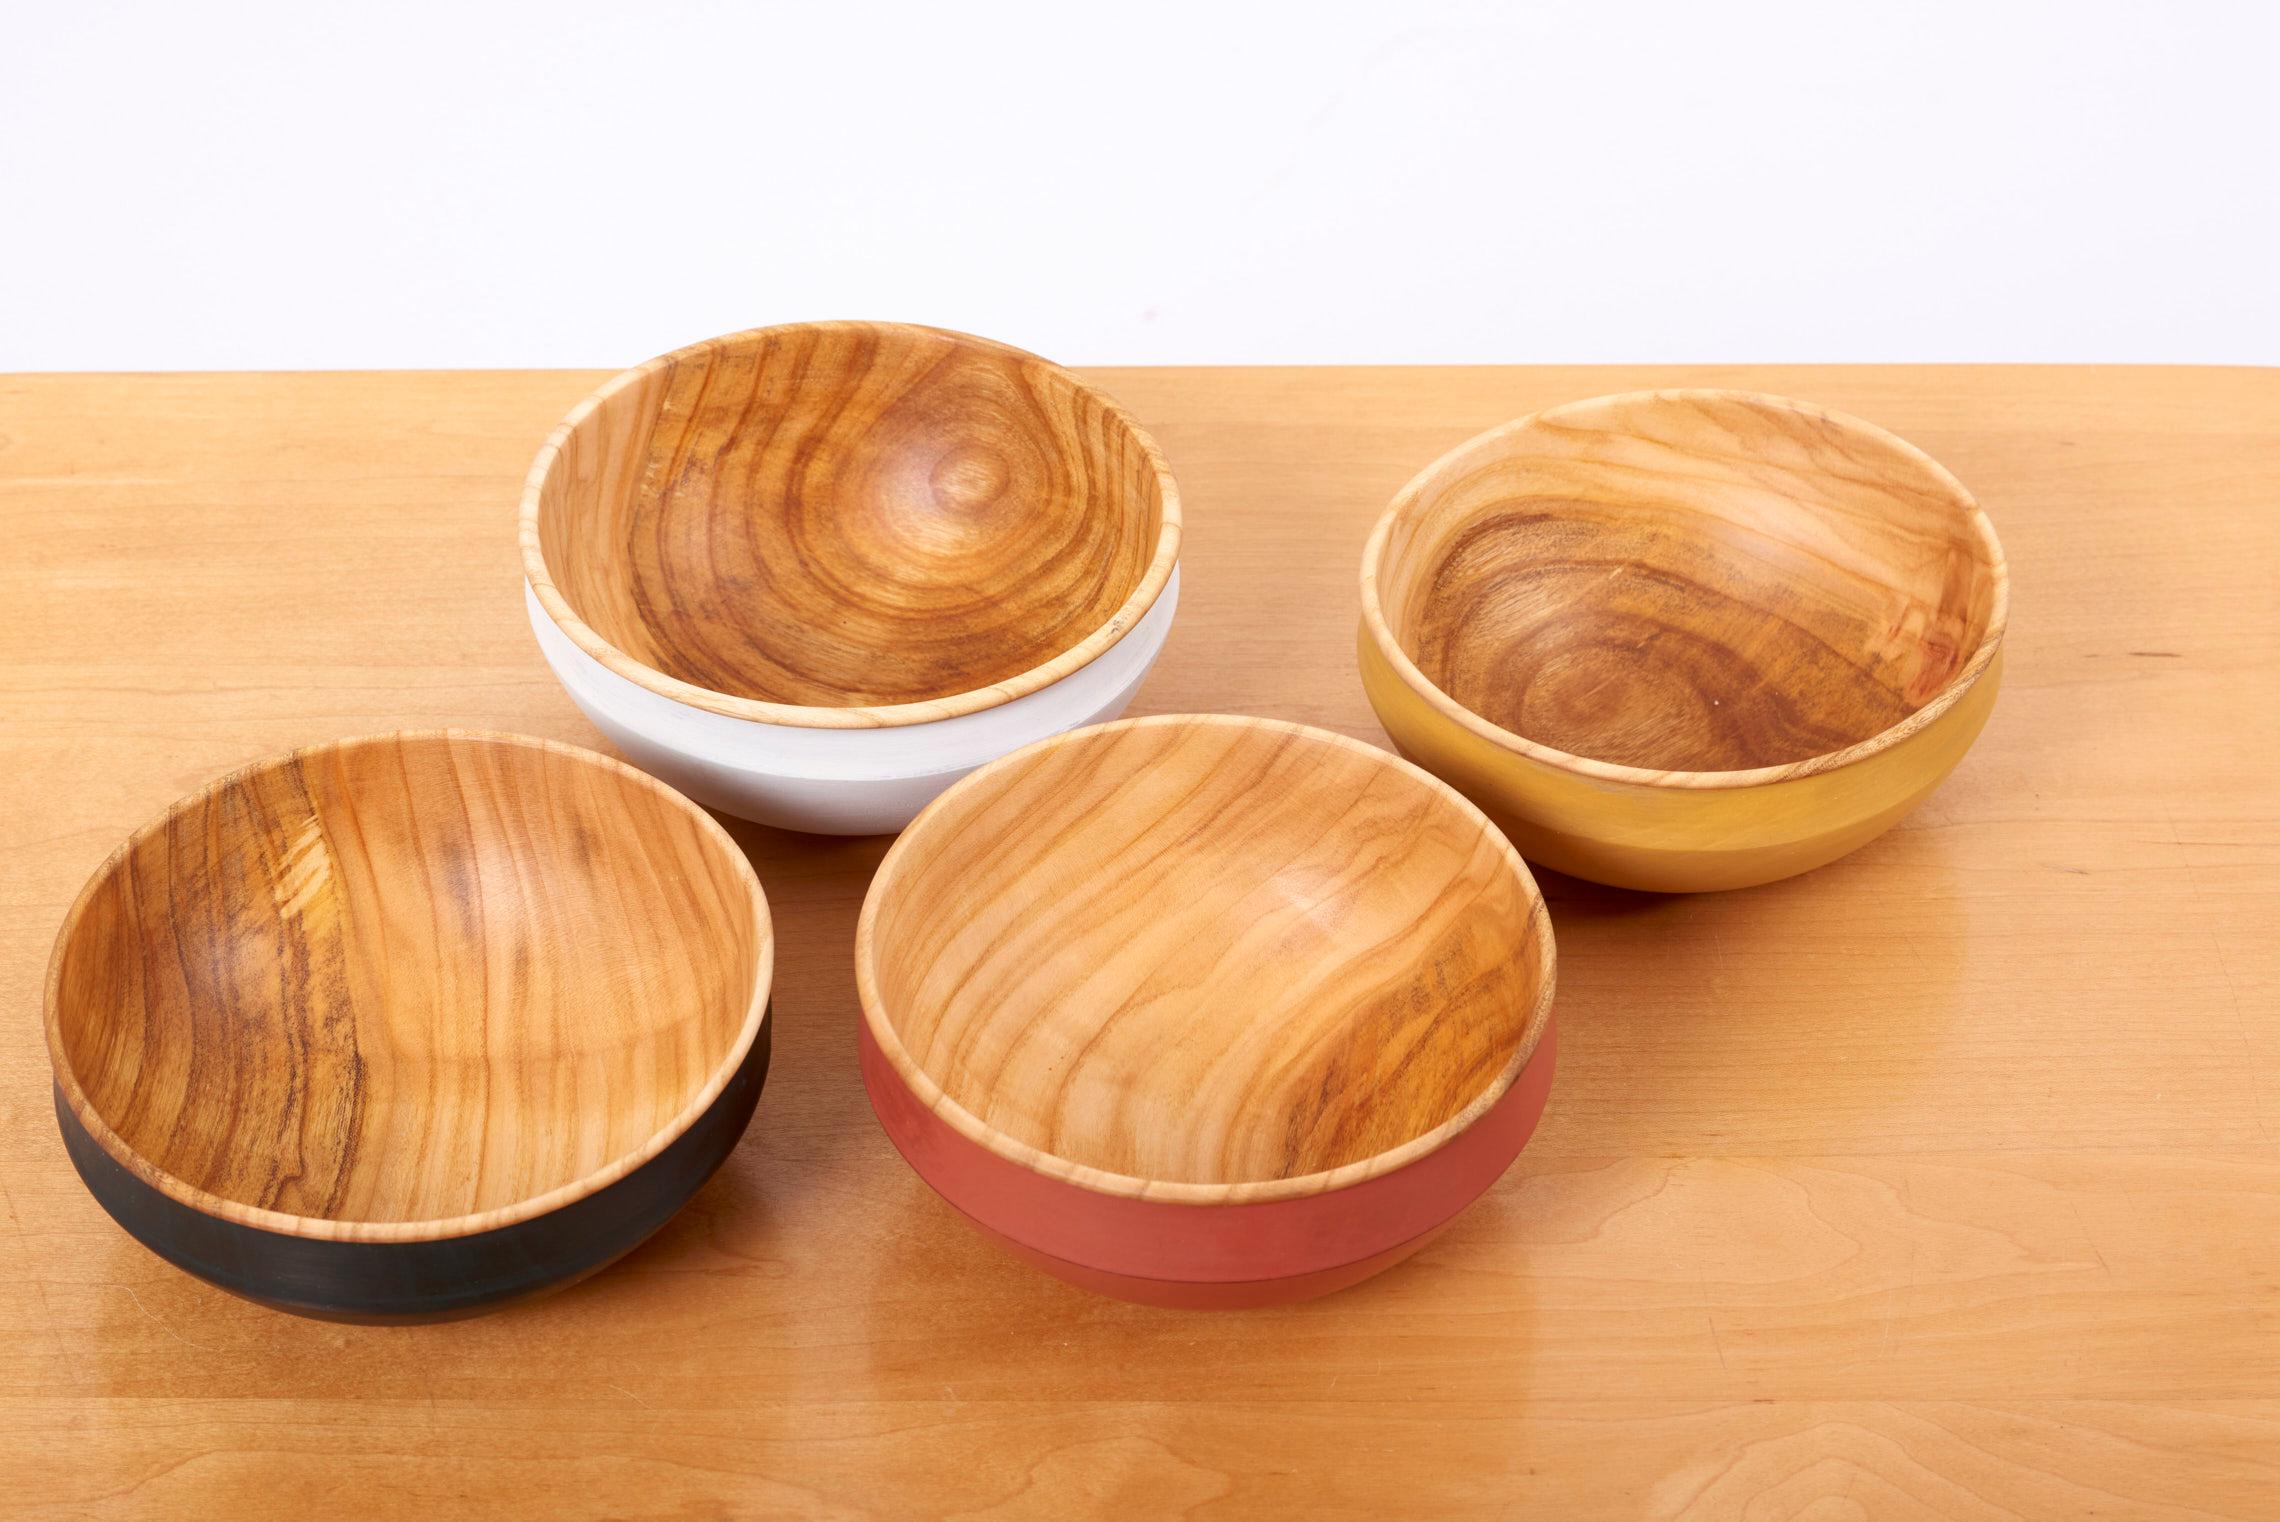 Contemporary Set of 4 Wooden Bowls by Fabian Fischer, Germany, 2020 For Sale